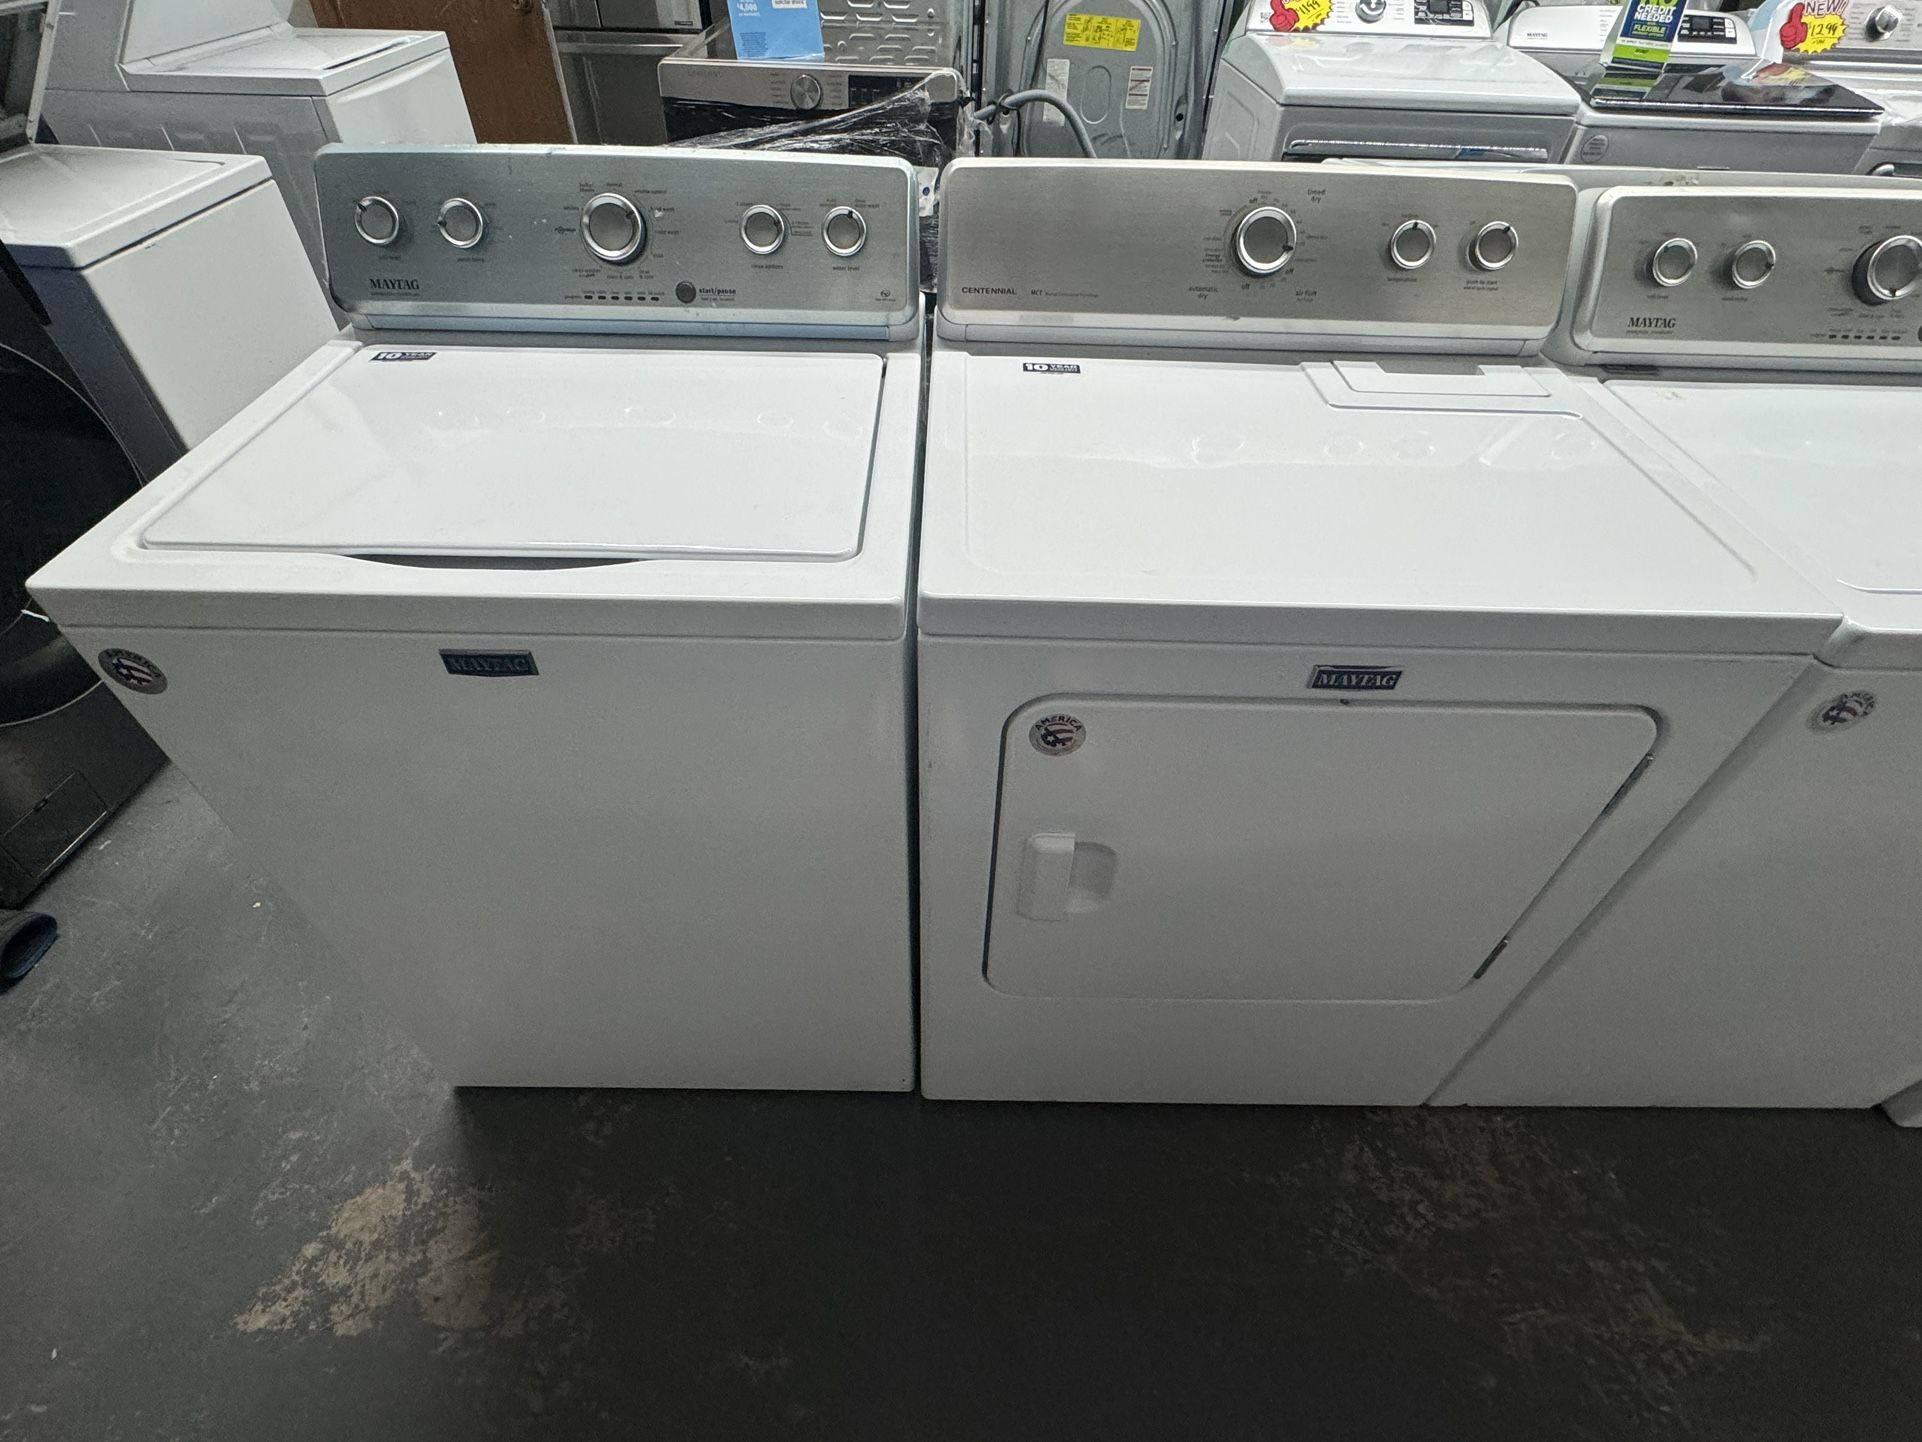 Maytag Washer & Dryer Set with Stainless Steel Tub